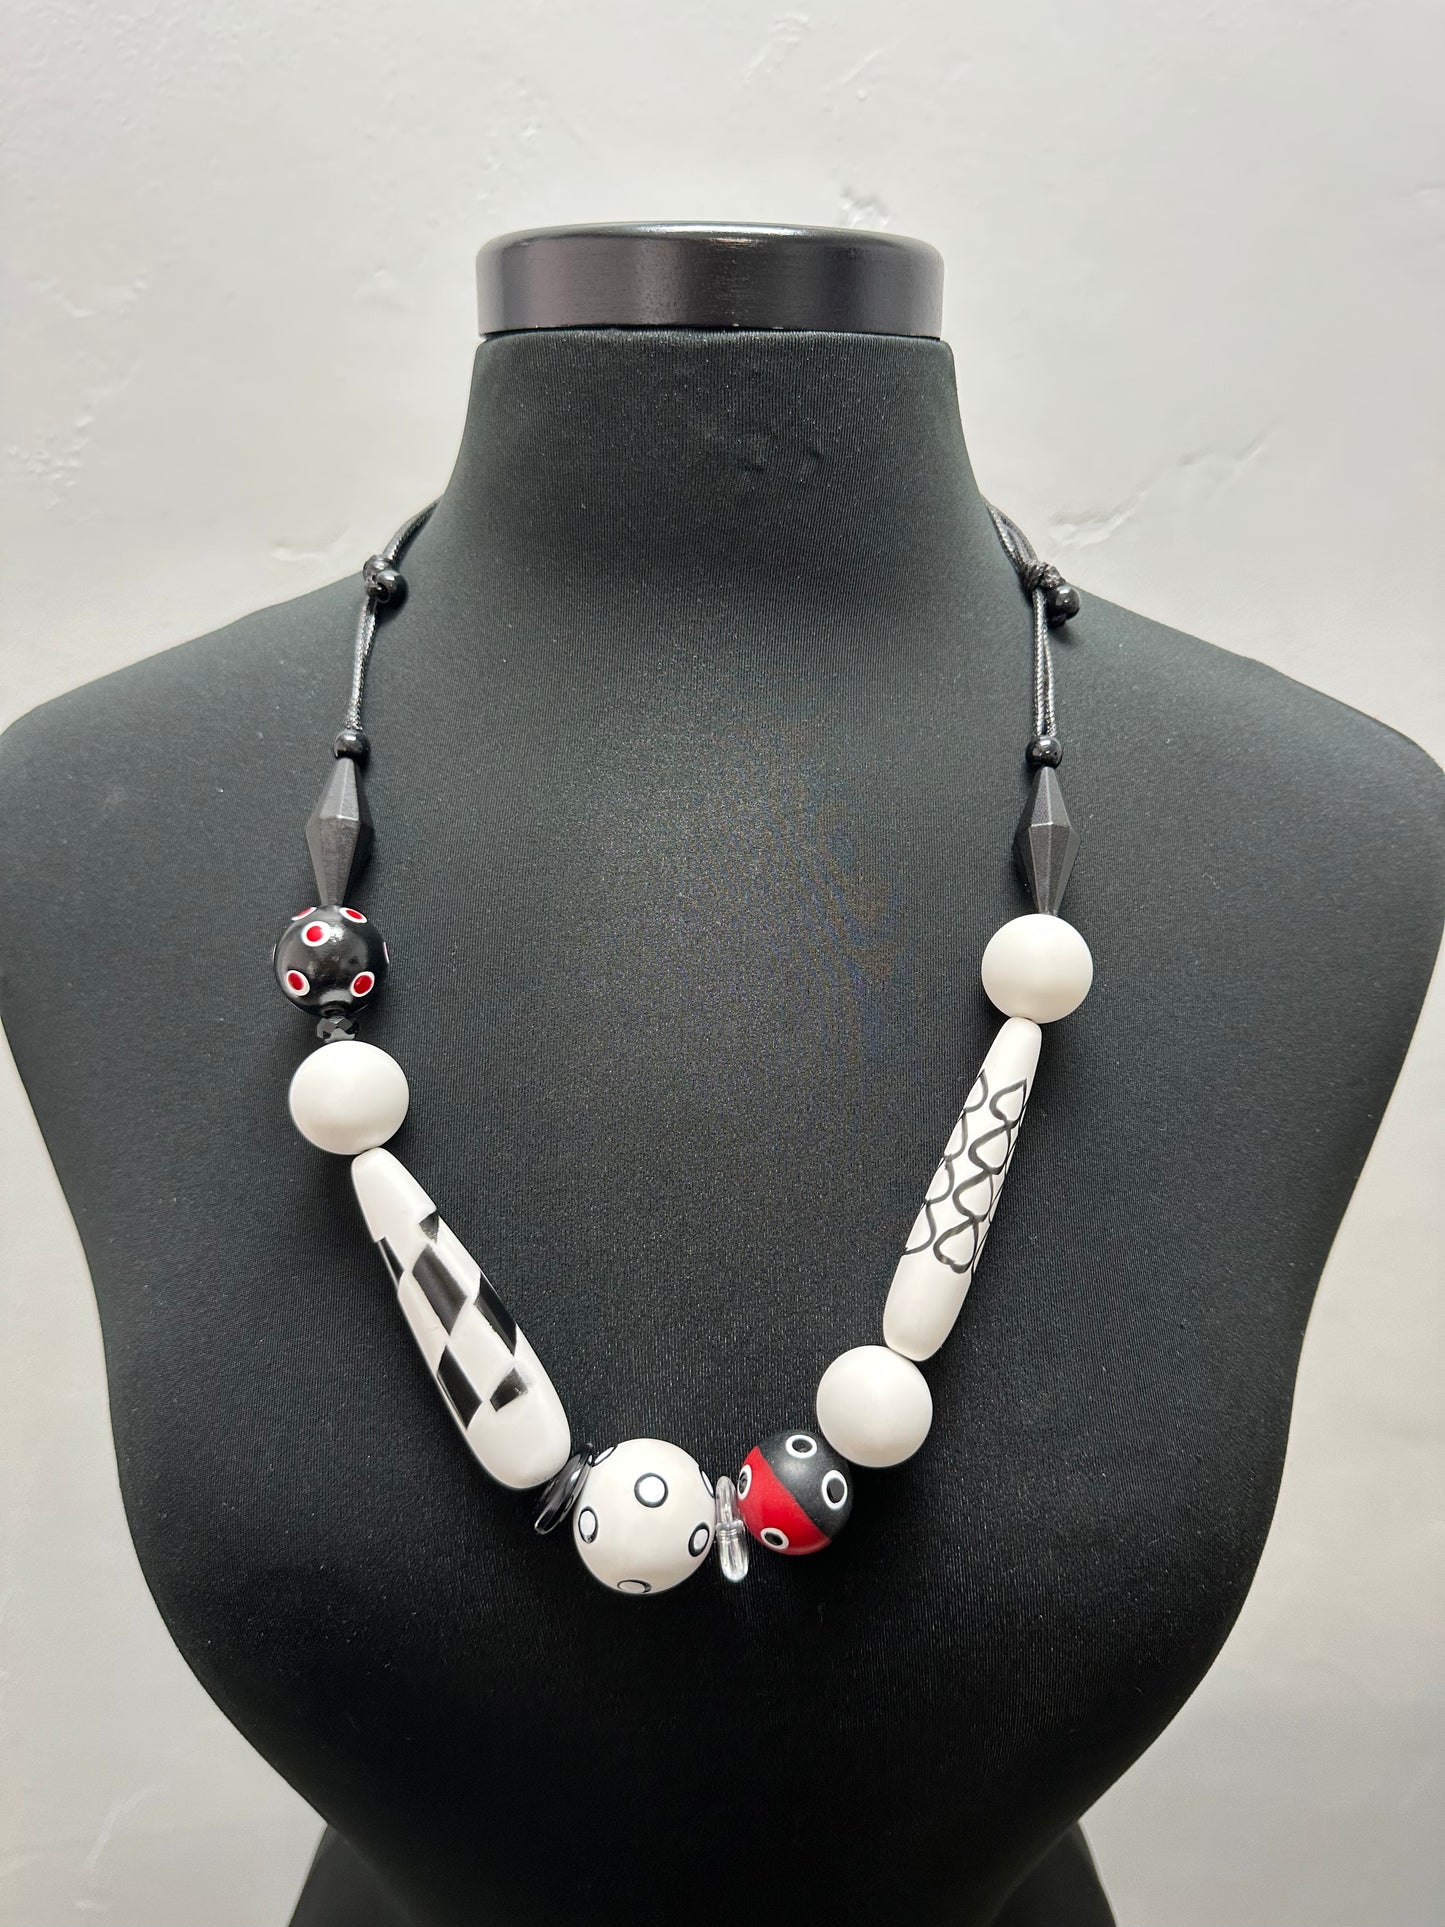 Black and White Pattern Necklace